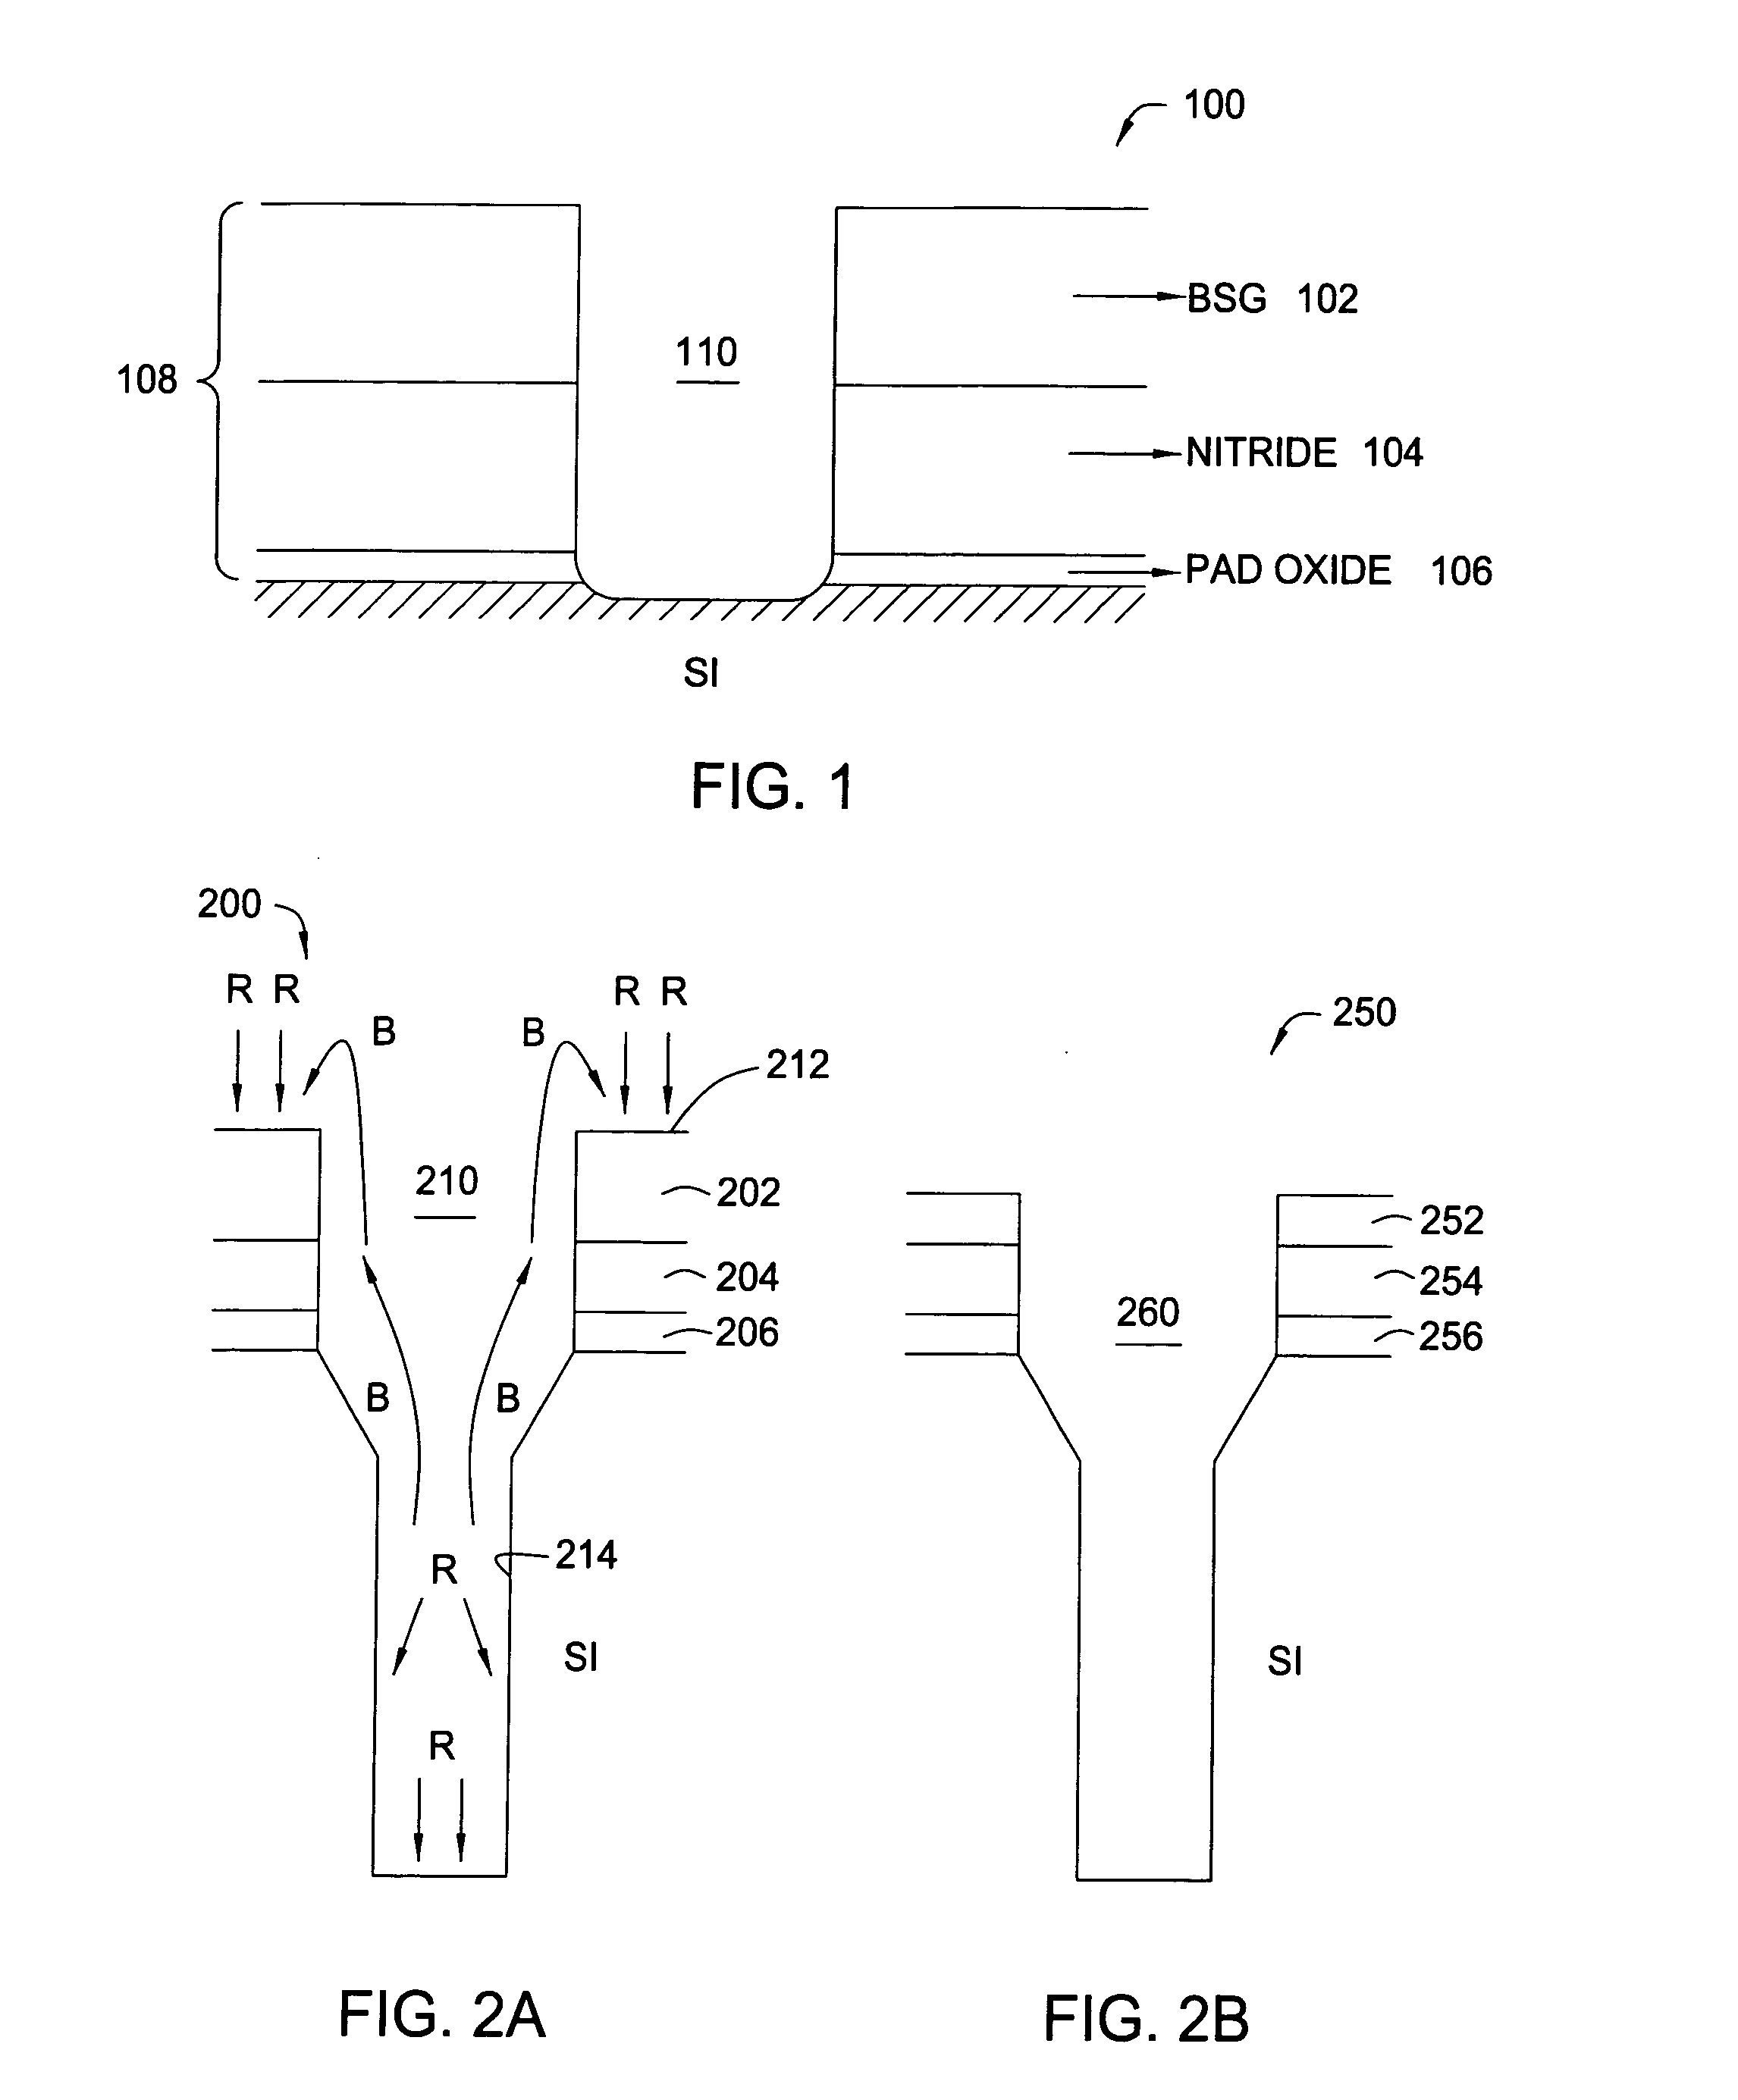 Chamber stability monitoring using an integrated metrology tool